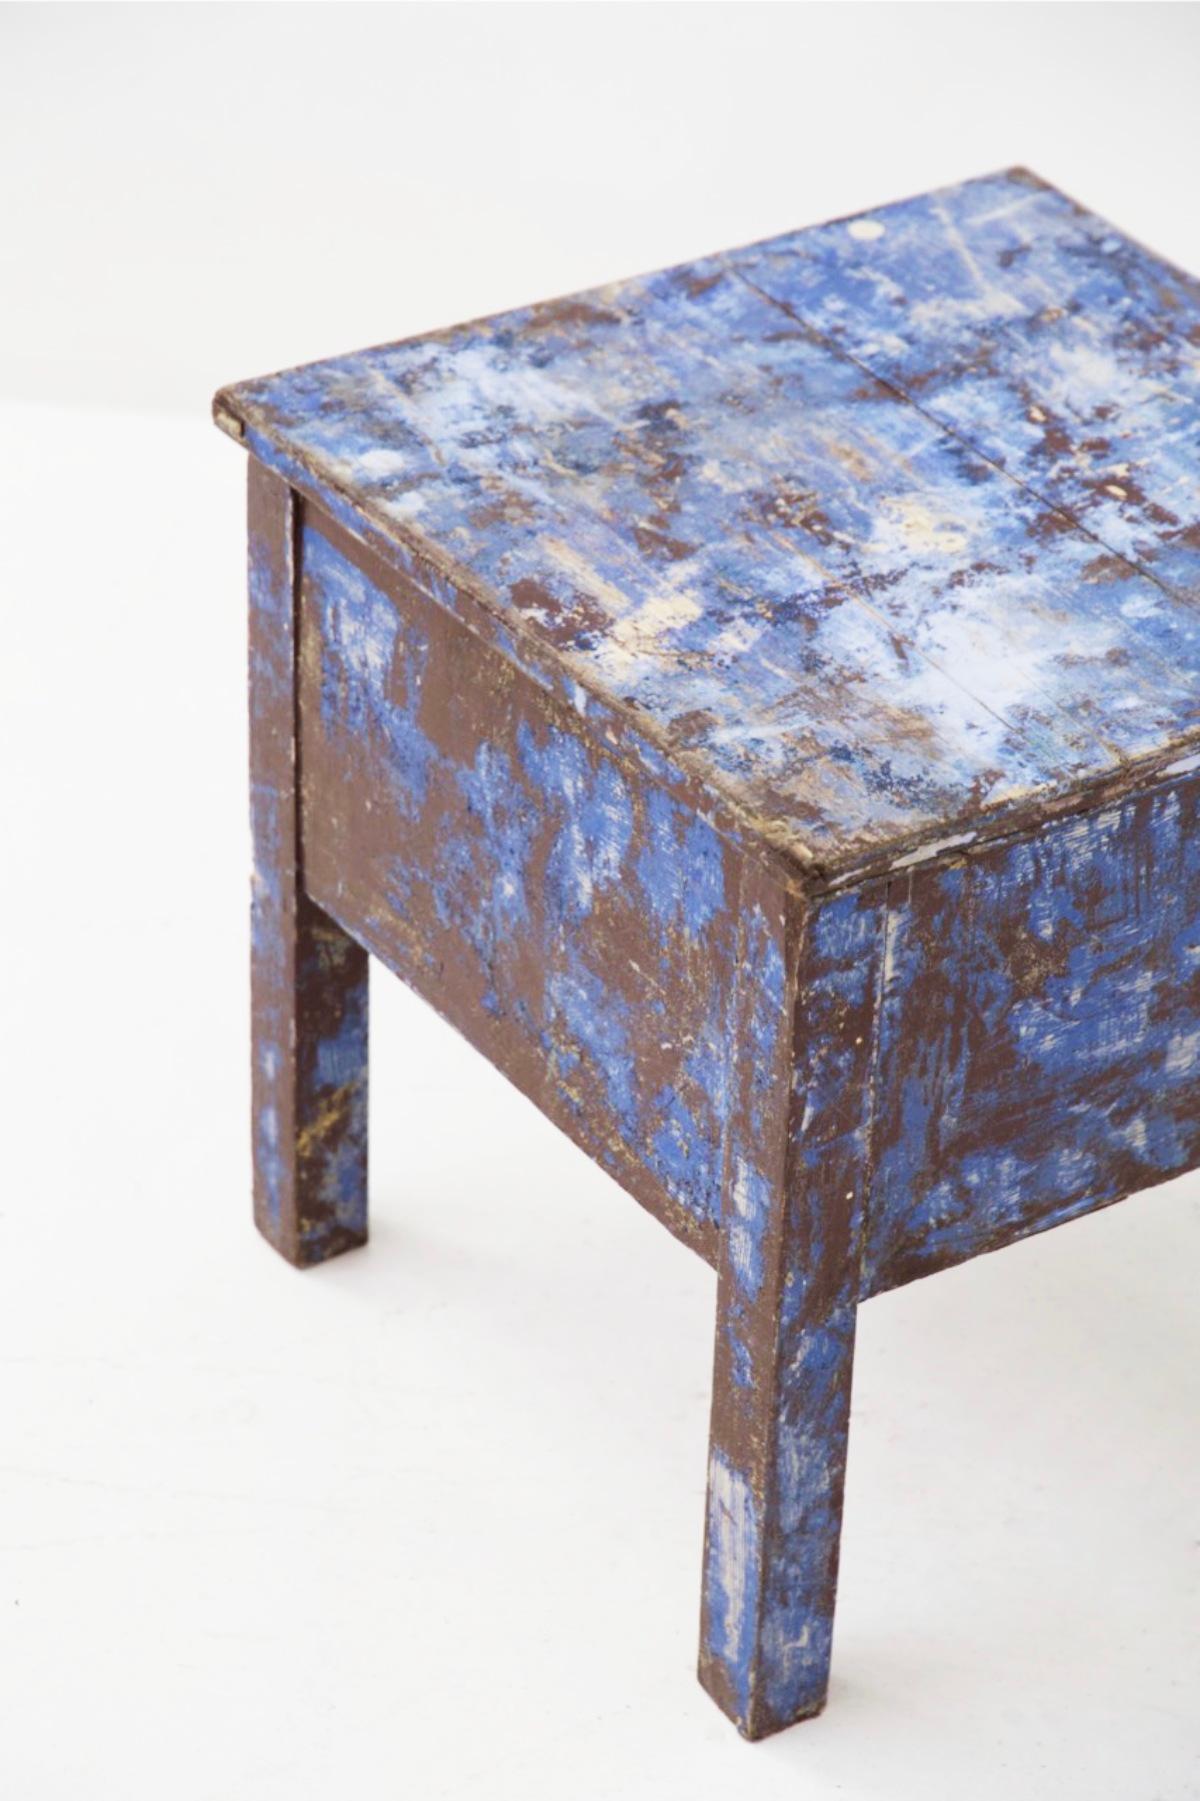 Sheet Metal Rustic Chic Blue Stools For Sale